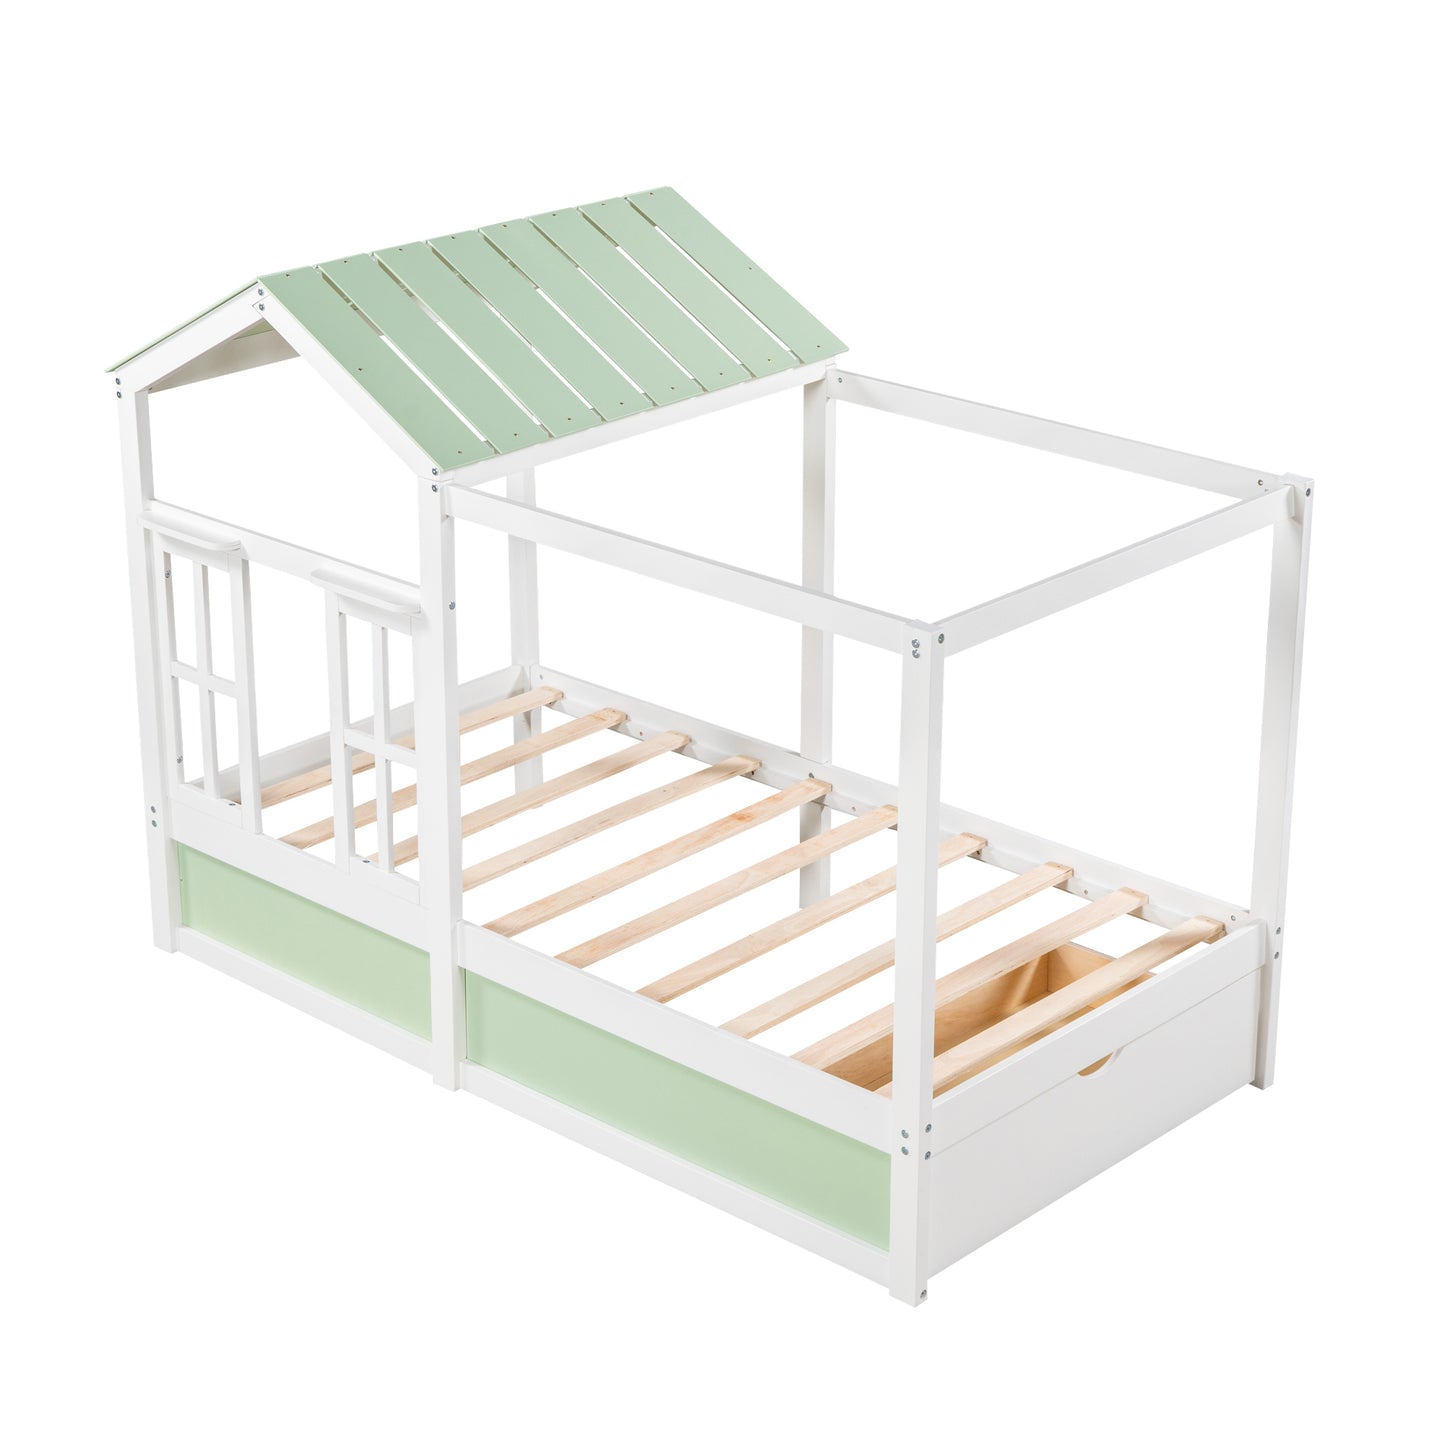 Twin Size House Bed with Roof, Window and Drawer - Green + White